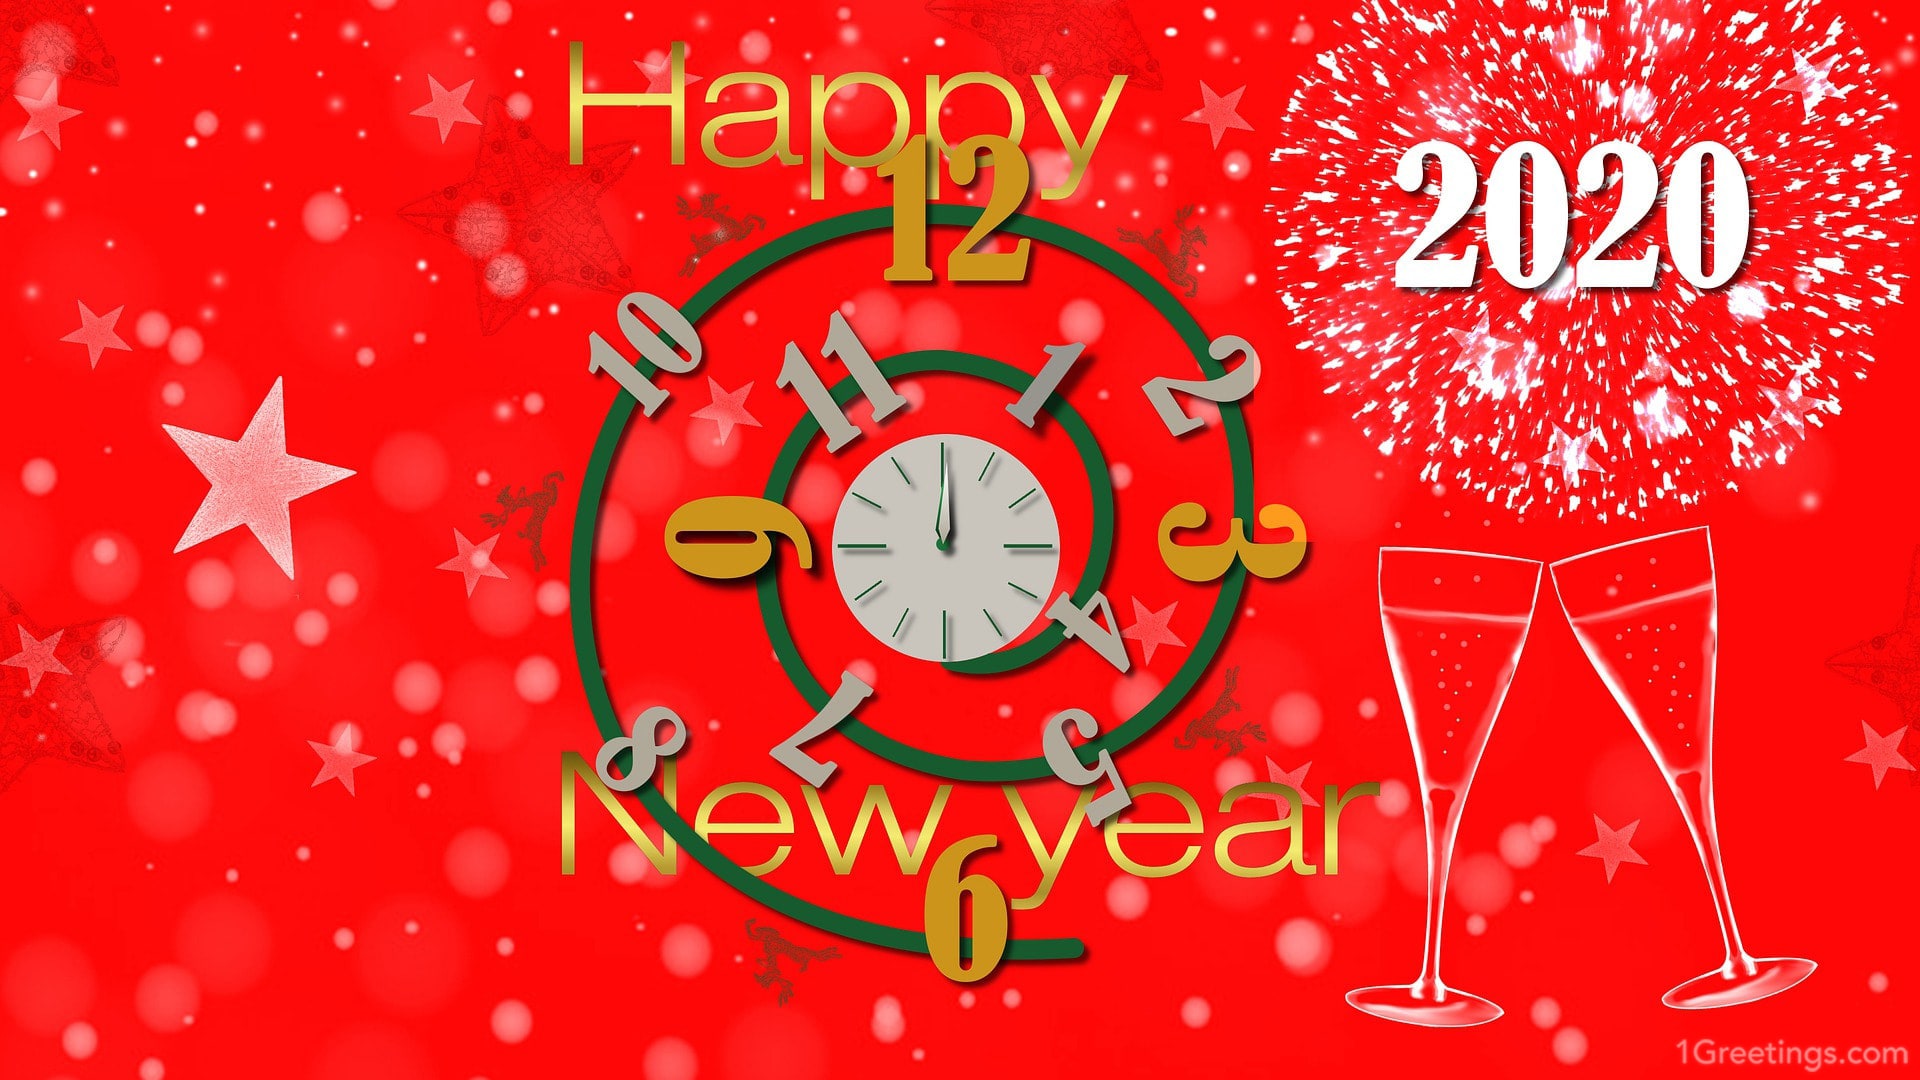 Best happy new year wallpapers hd 2020